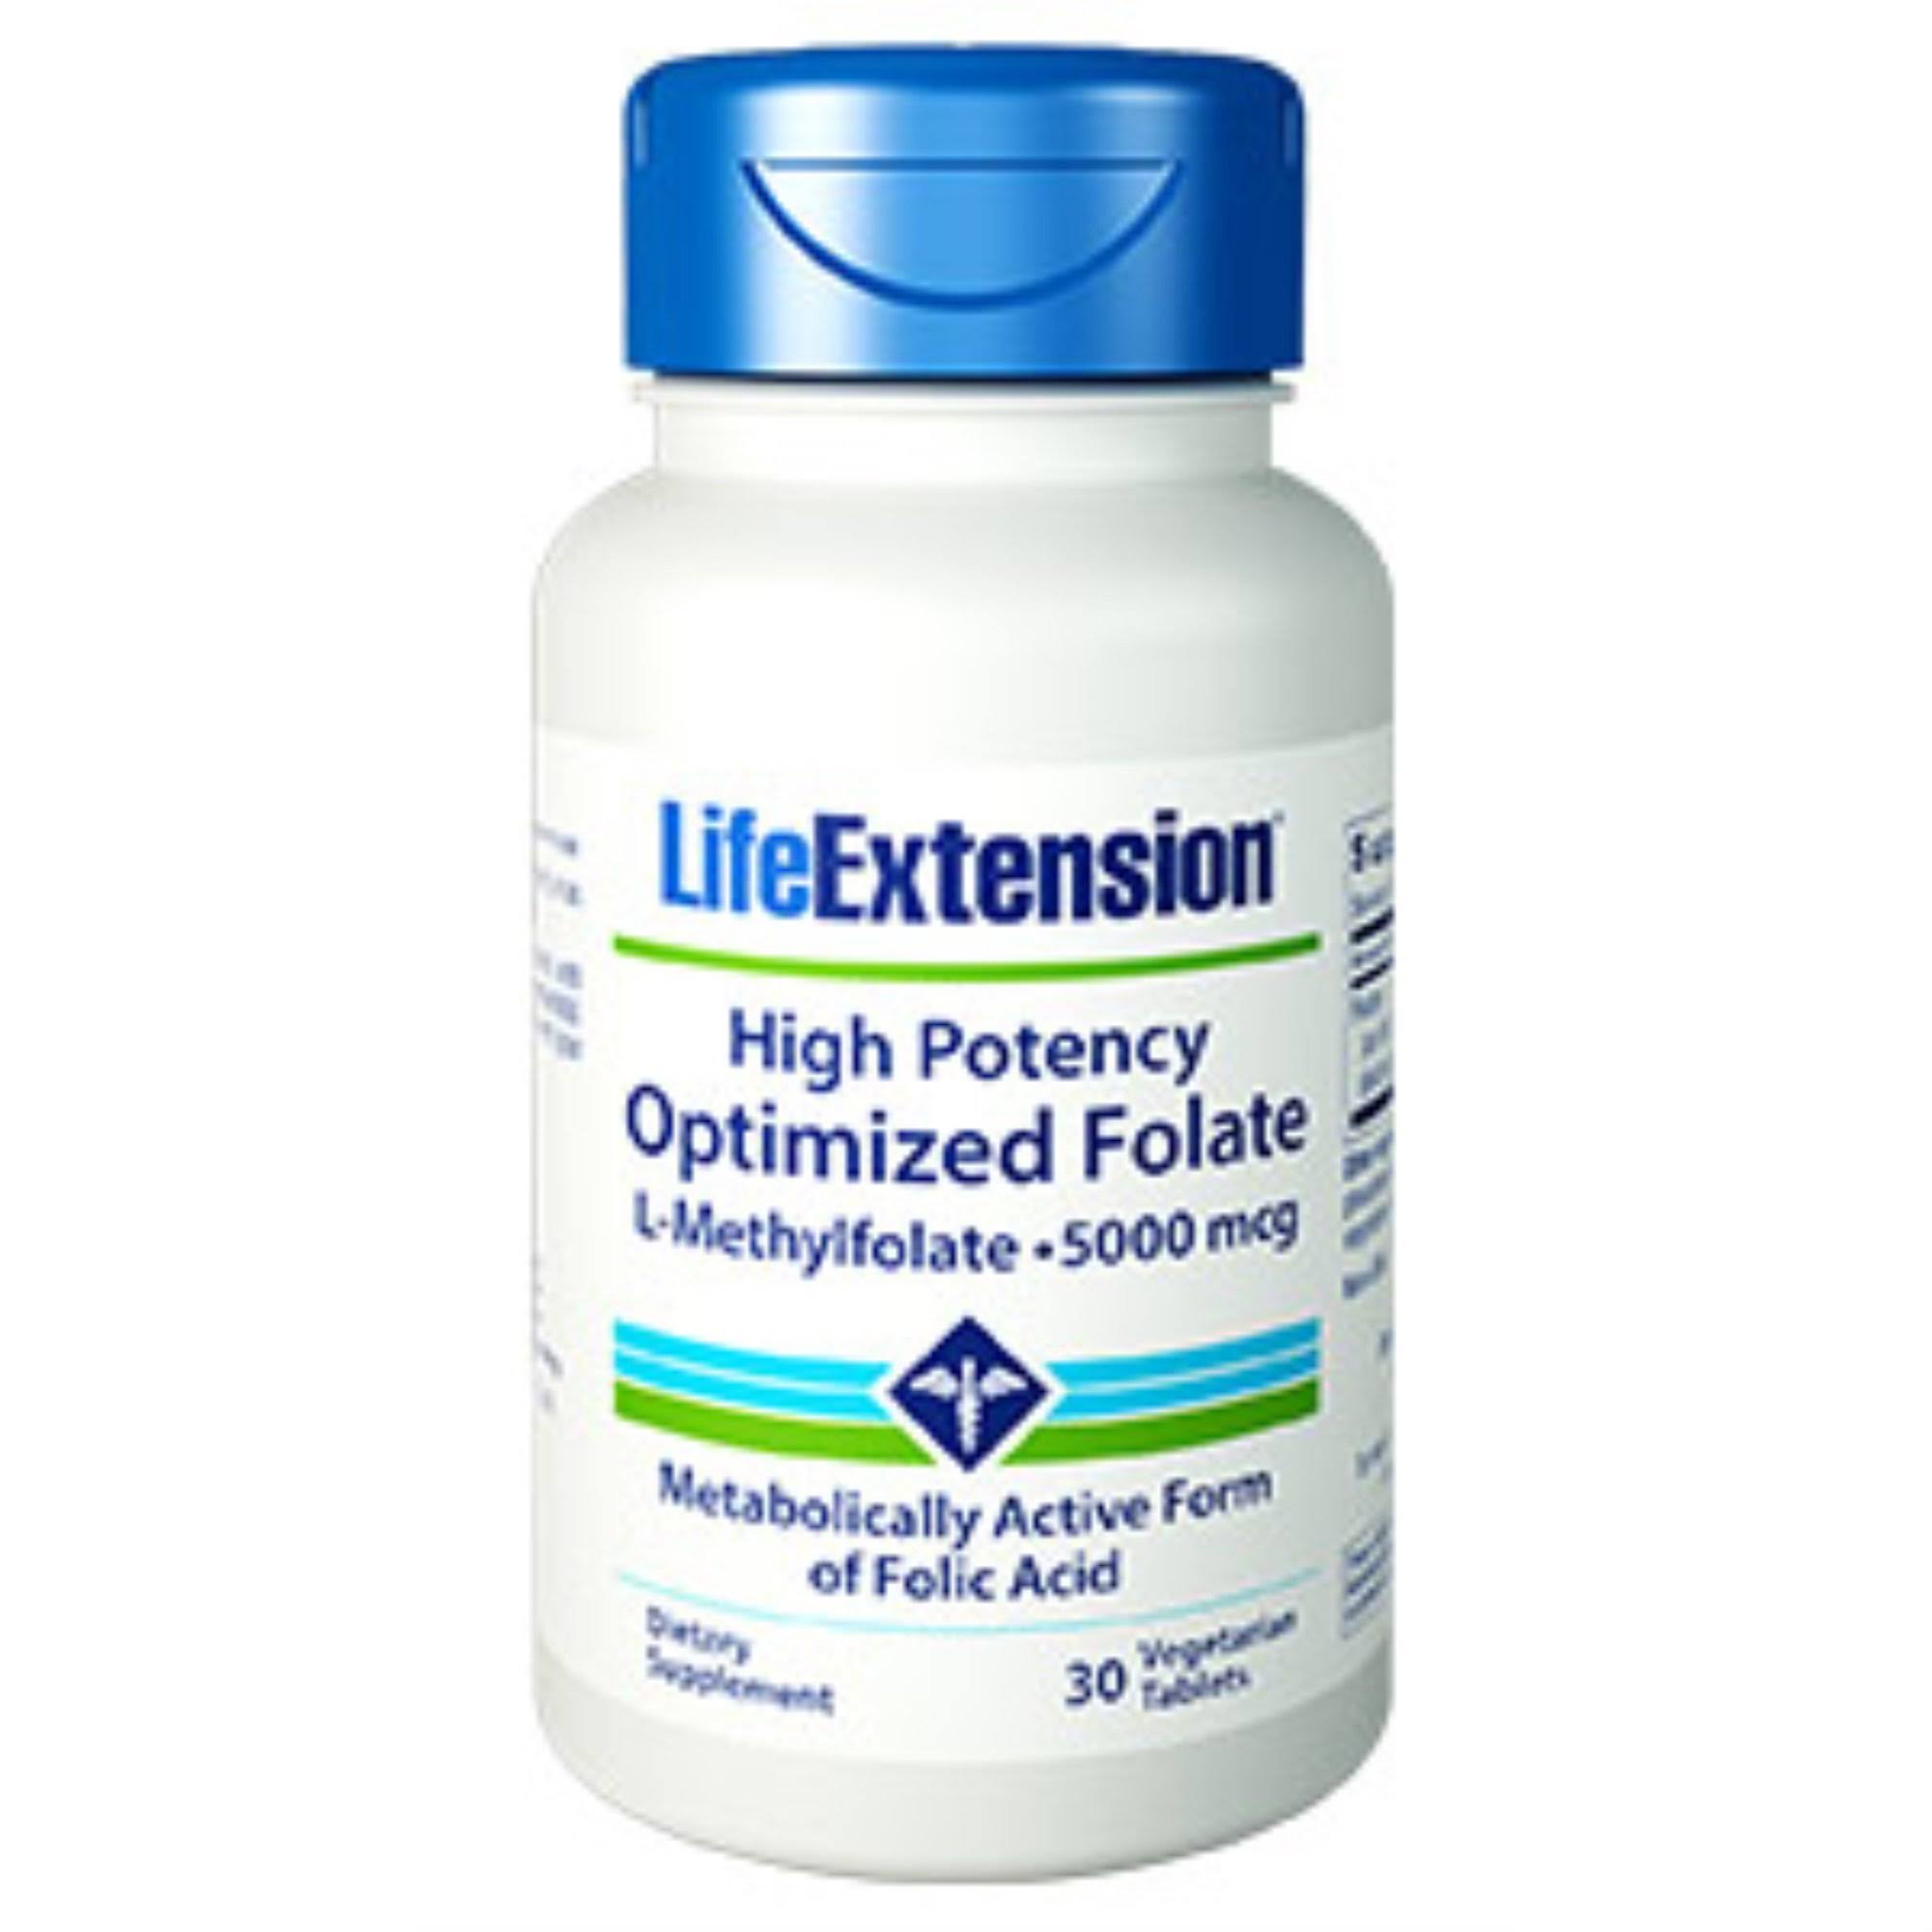 Life Extension High Potency Optimized Folate - 30 Vegetarian Tabs